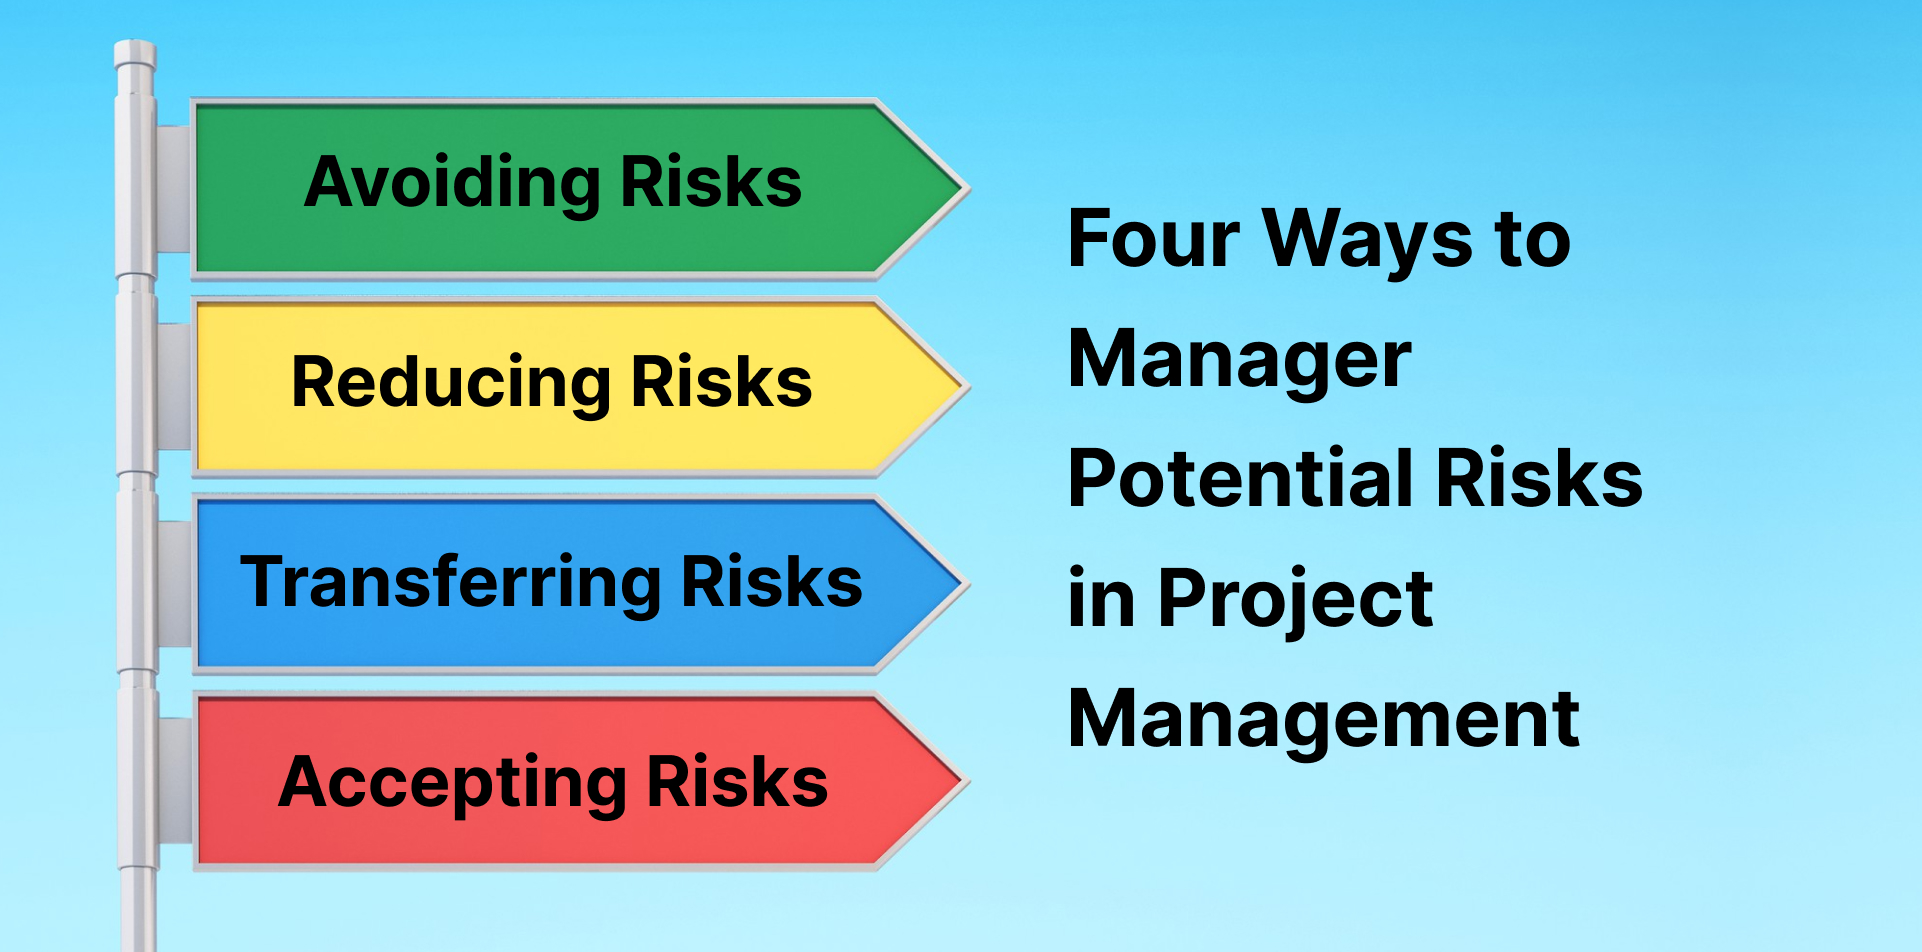 Four Ways to Manager Potential Risks in Project Management